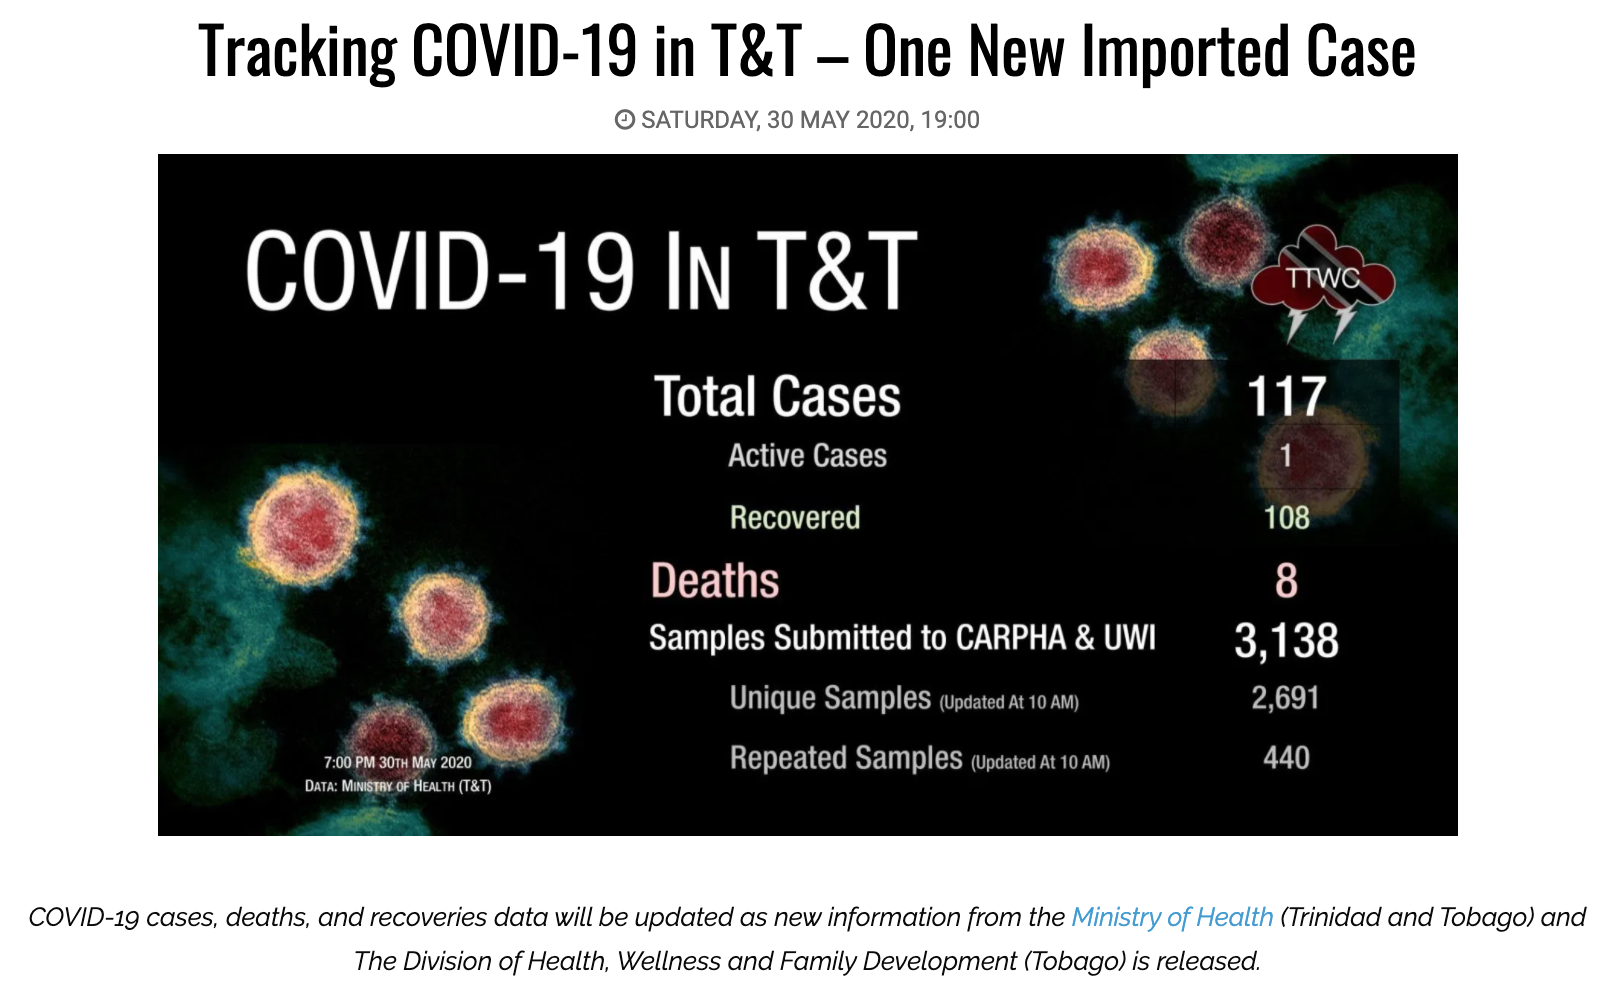 Number of COVID-19 cases in Trinidad and Tobago